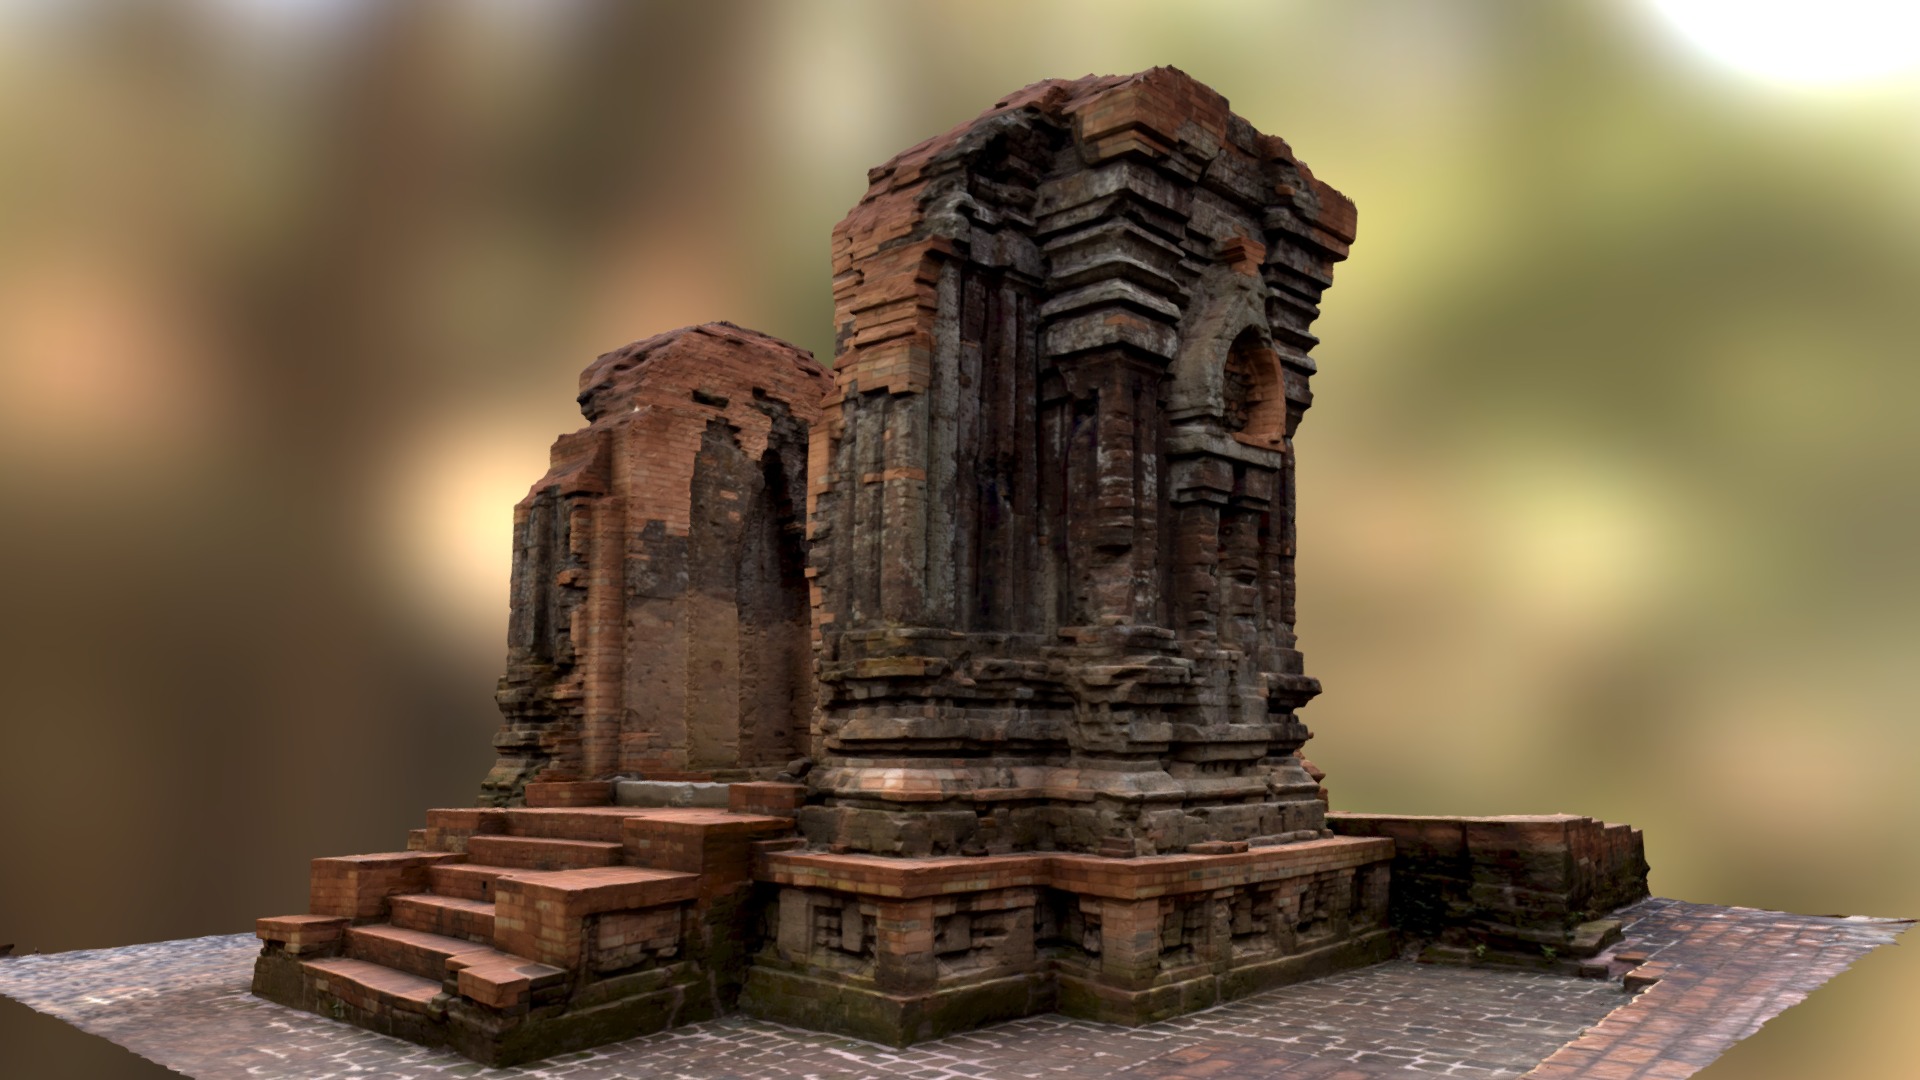 3D model Area K Mỹ Sơn Vietnam - This is a 3D model of the Area K Mỹ Sơn Vietnam. The 3D model is about a stone structure with a stone wall.